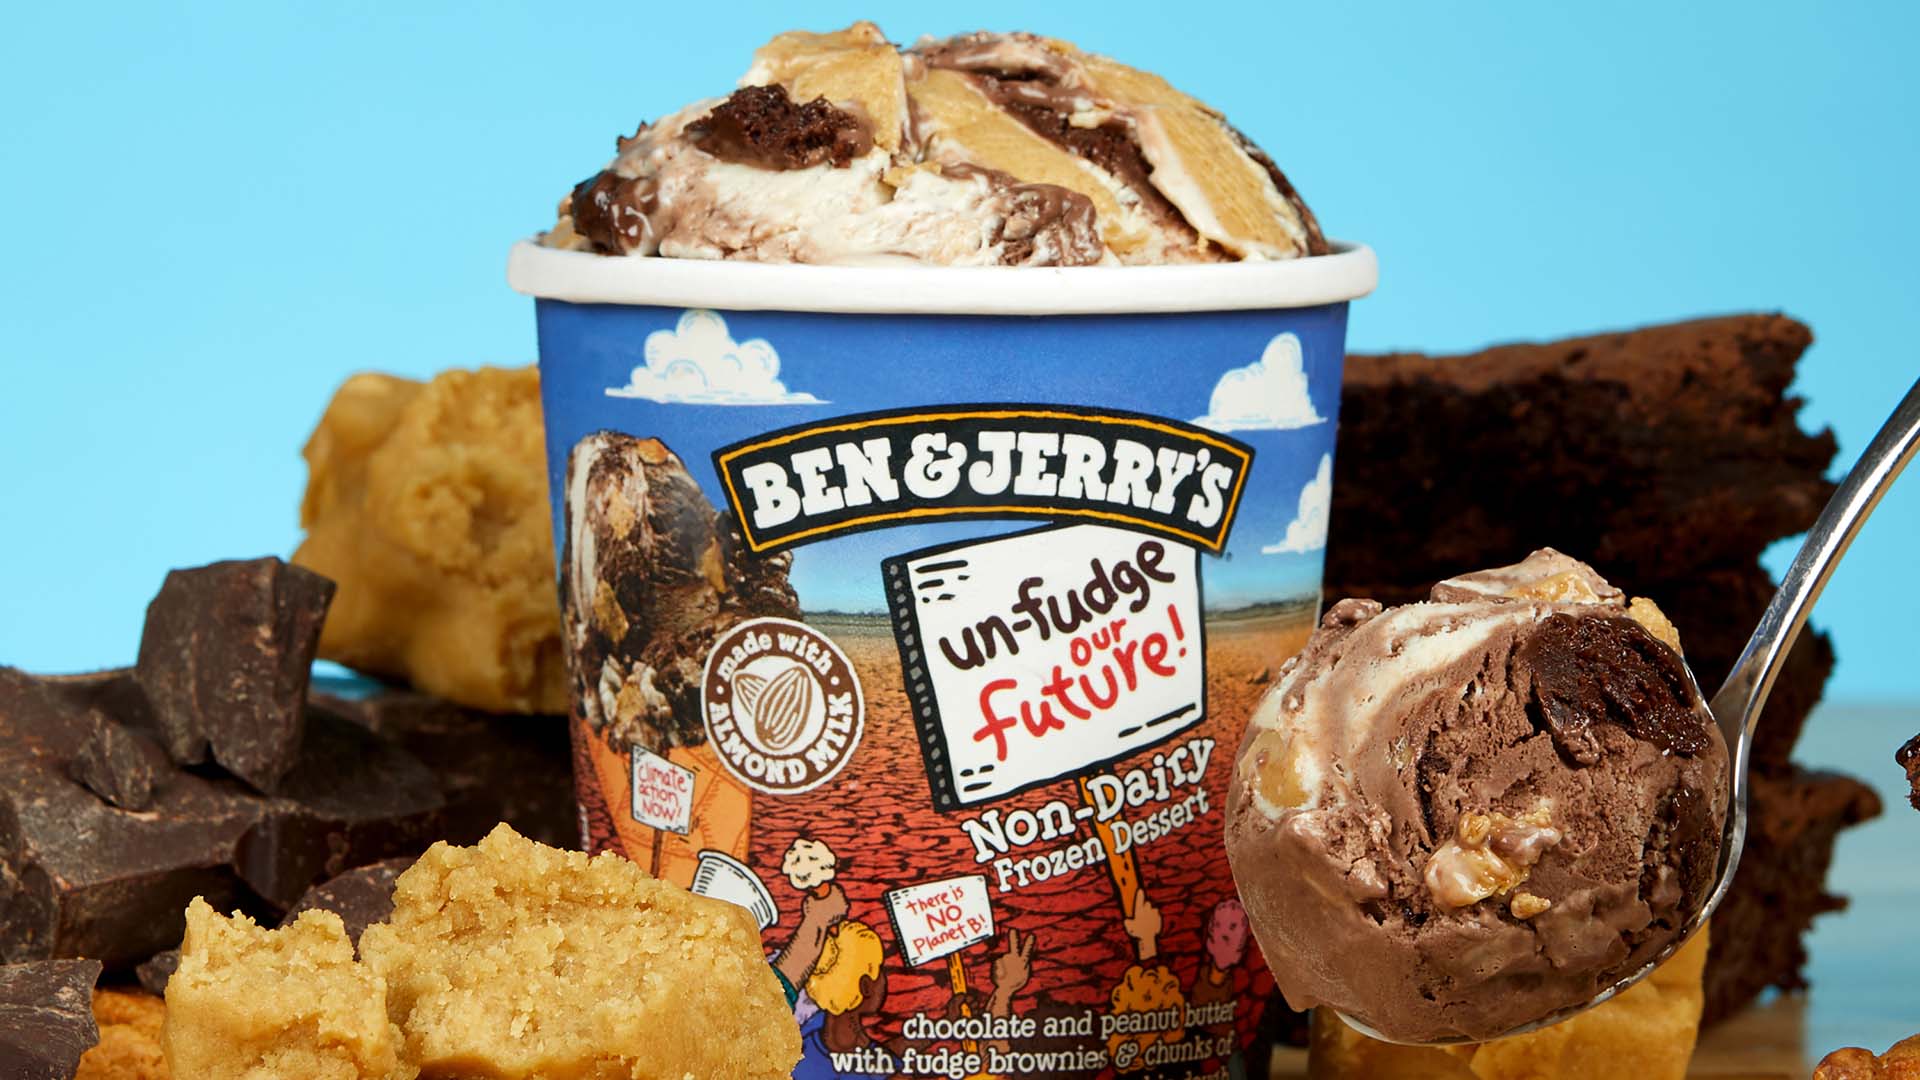 Ben & Jerry's Has Released a New Non-Dairy Fudge Ice Cream to Campaign Against Fossil Fuels